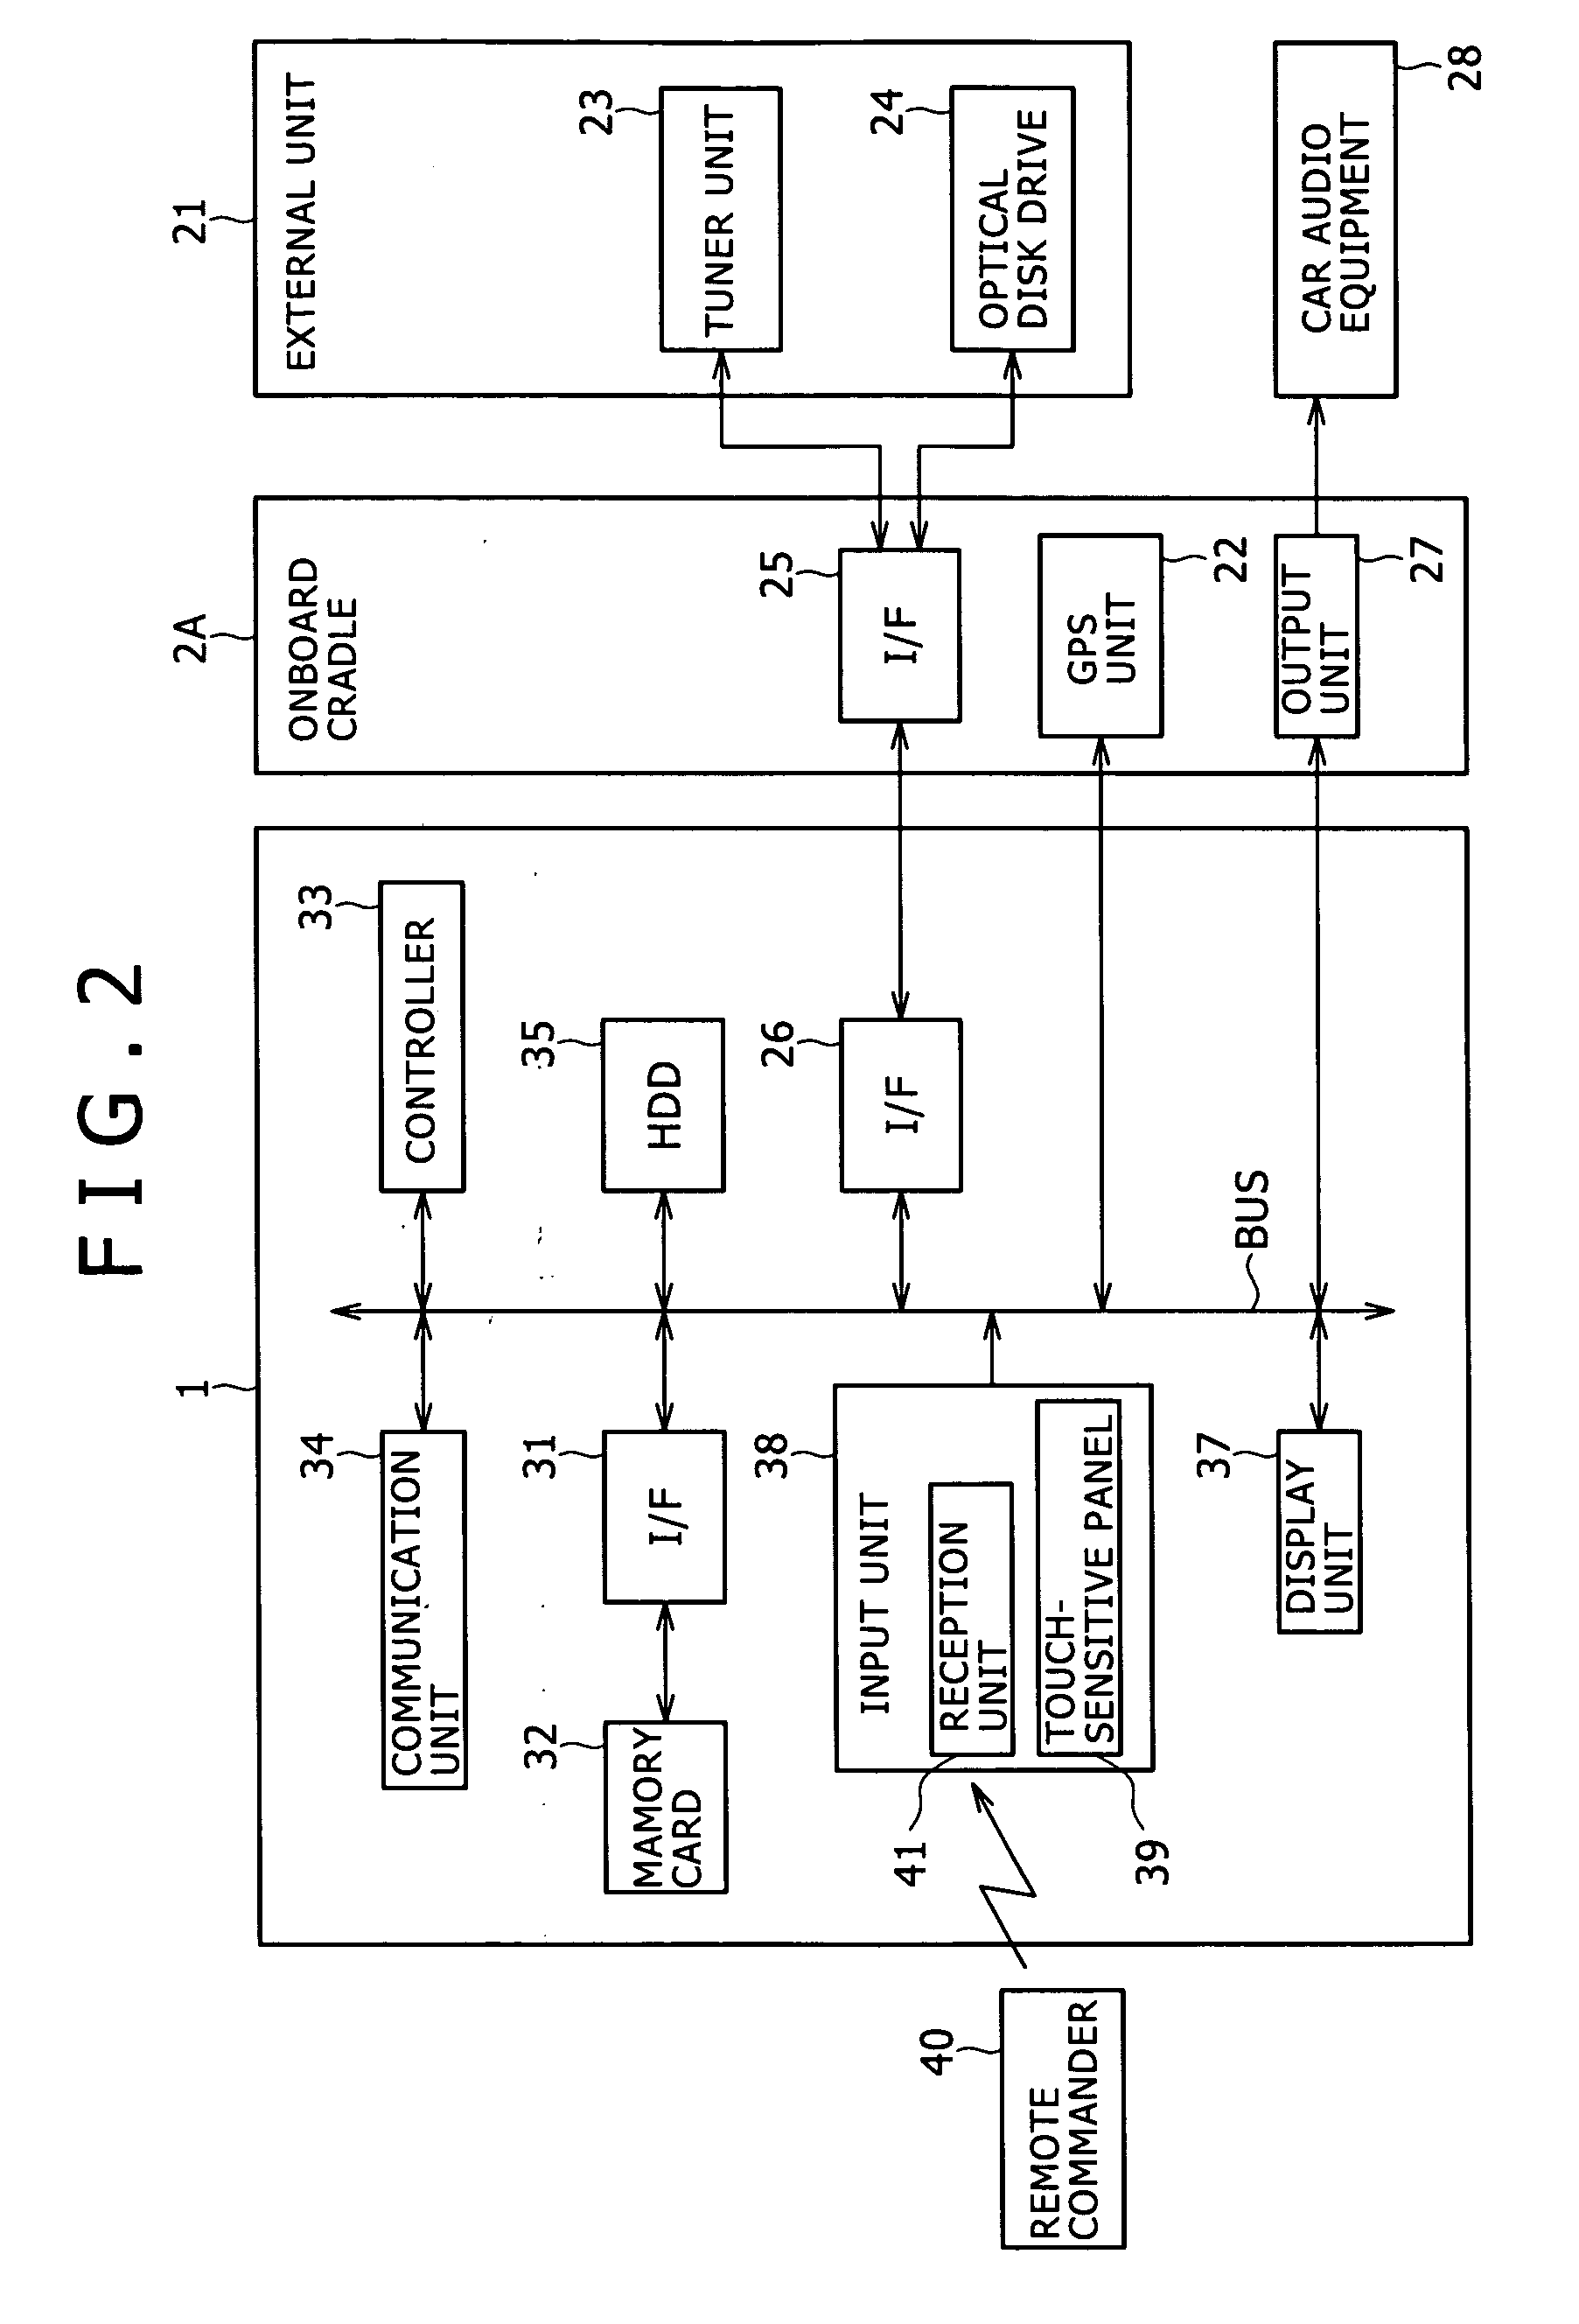 Vehicle-mounted apparatus, information providing method for use with vehicle-mounted apparatus, and recording medium recorded information providing method program for use with vehicle-mounted apparatus therein